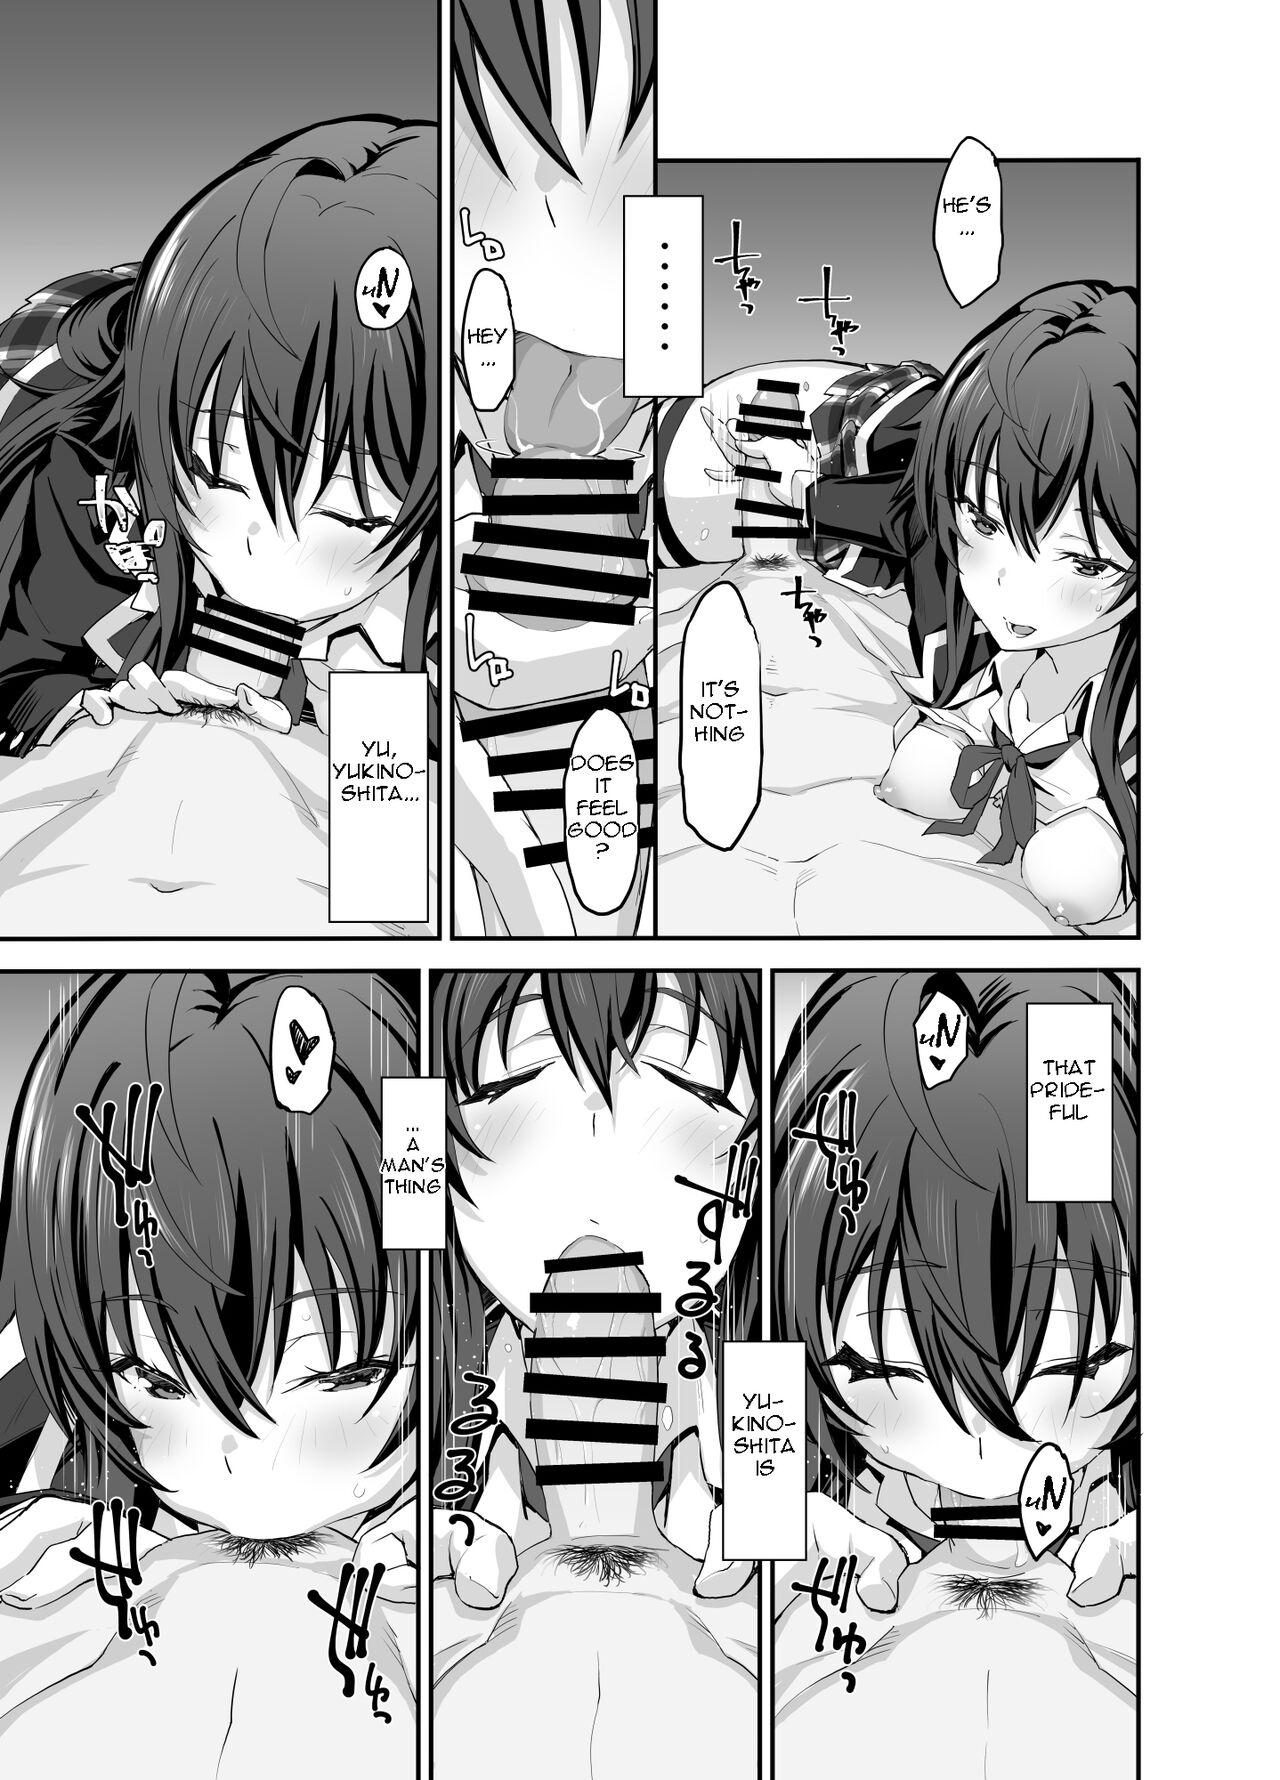 Douse Ore no Seishun Love Come wa DT de Owatteiru. | My Teen Romantic Comedy Ended With Me Being A Virgin Anyway. 10